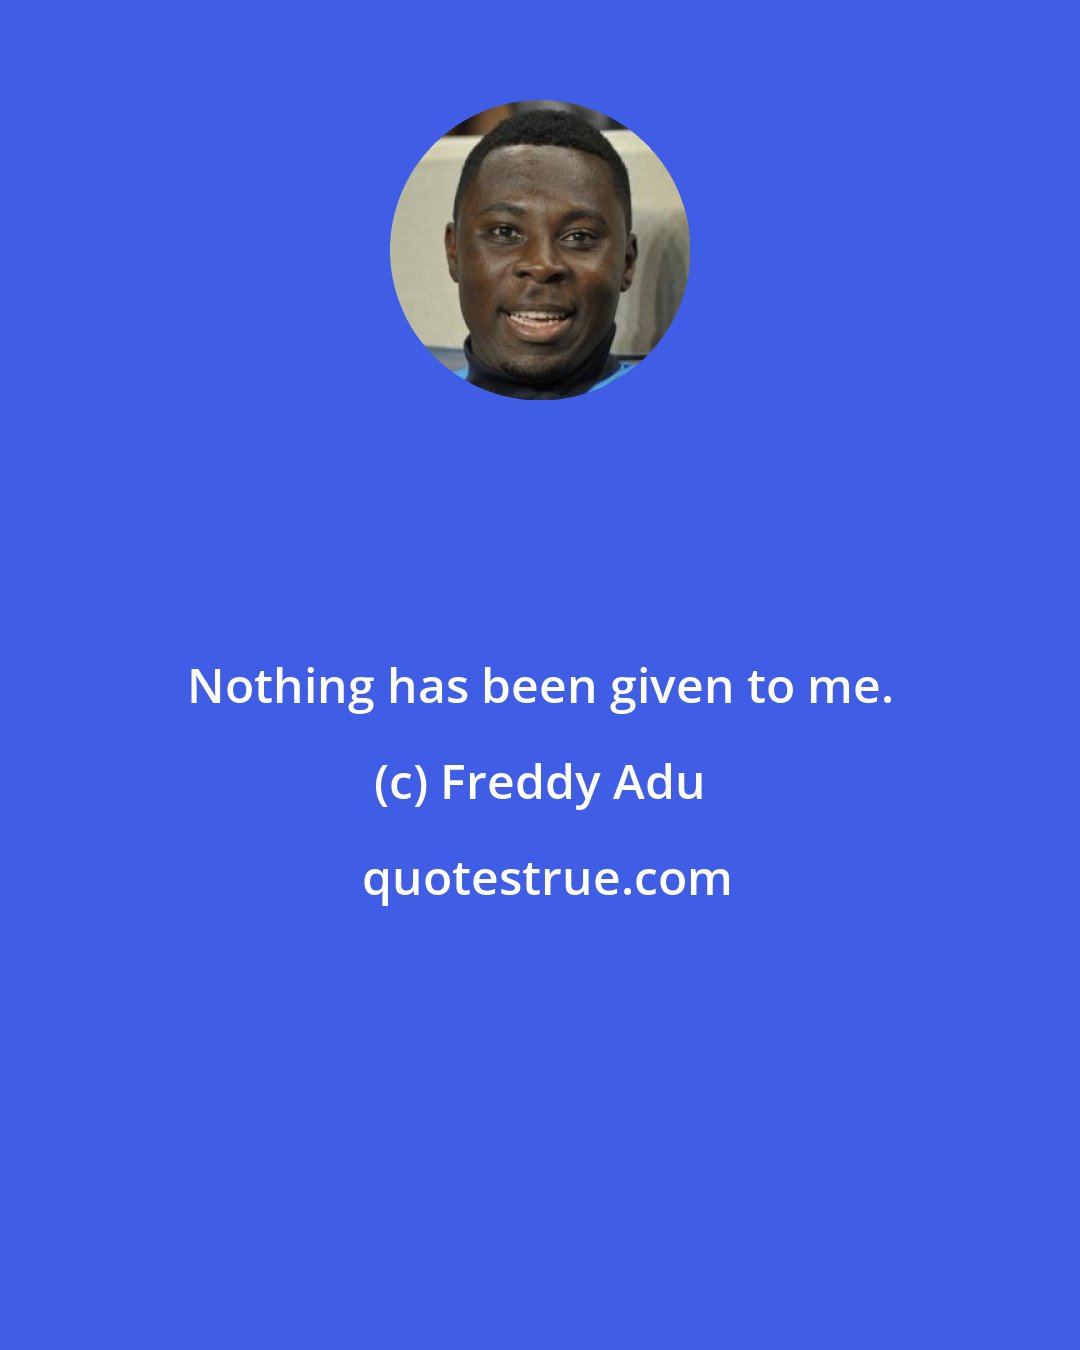 Freddy Adu: Nothing has been given to me.